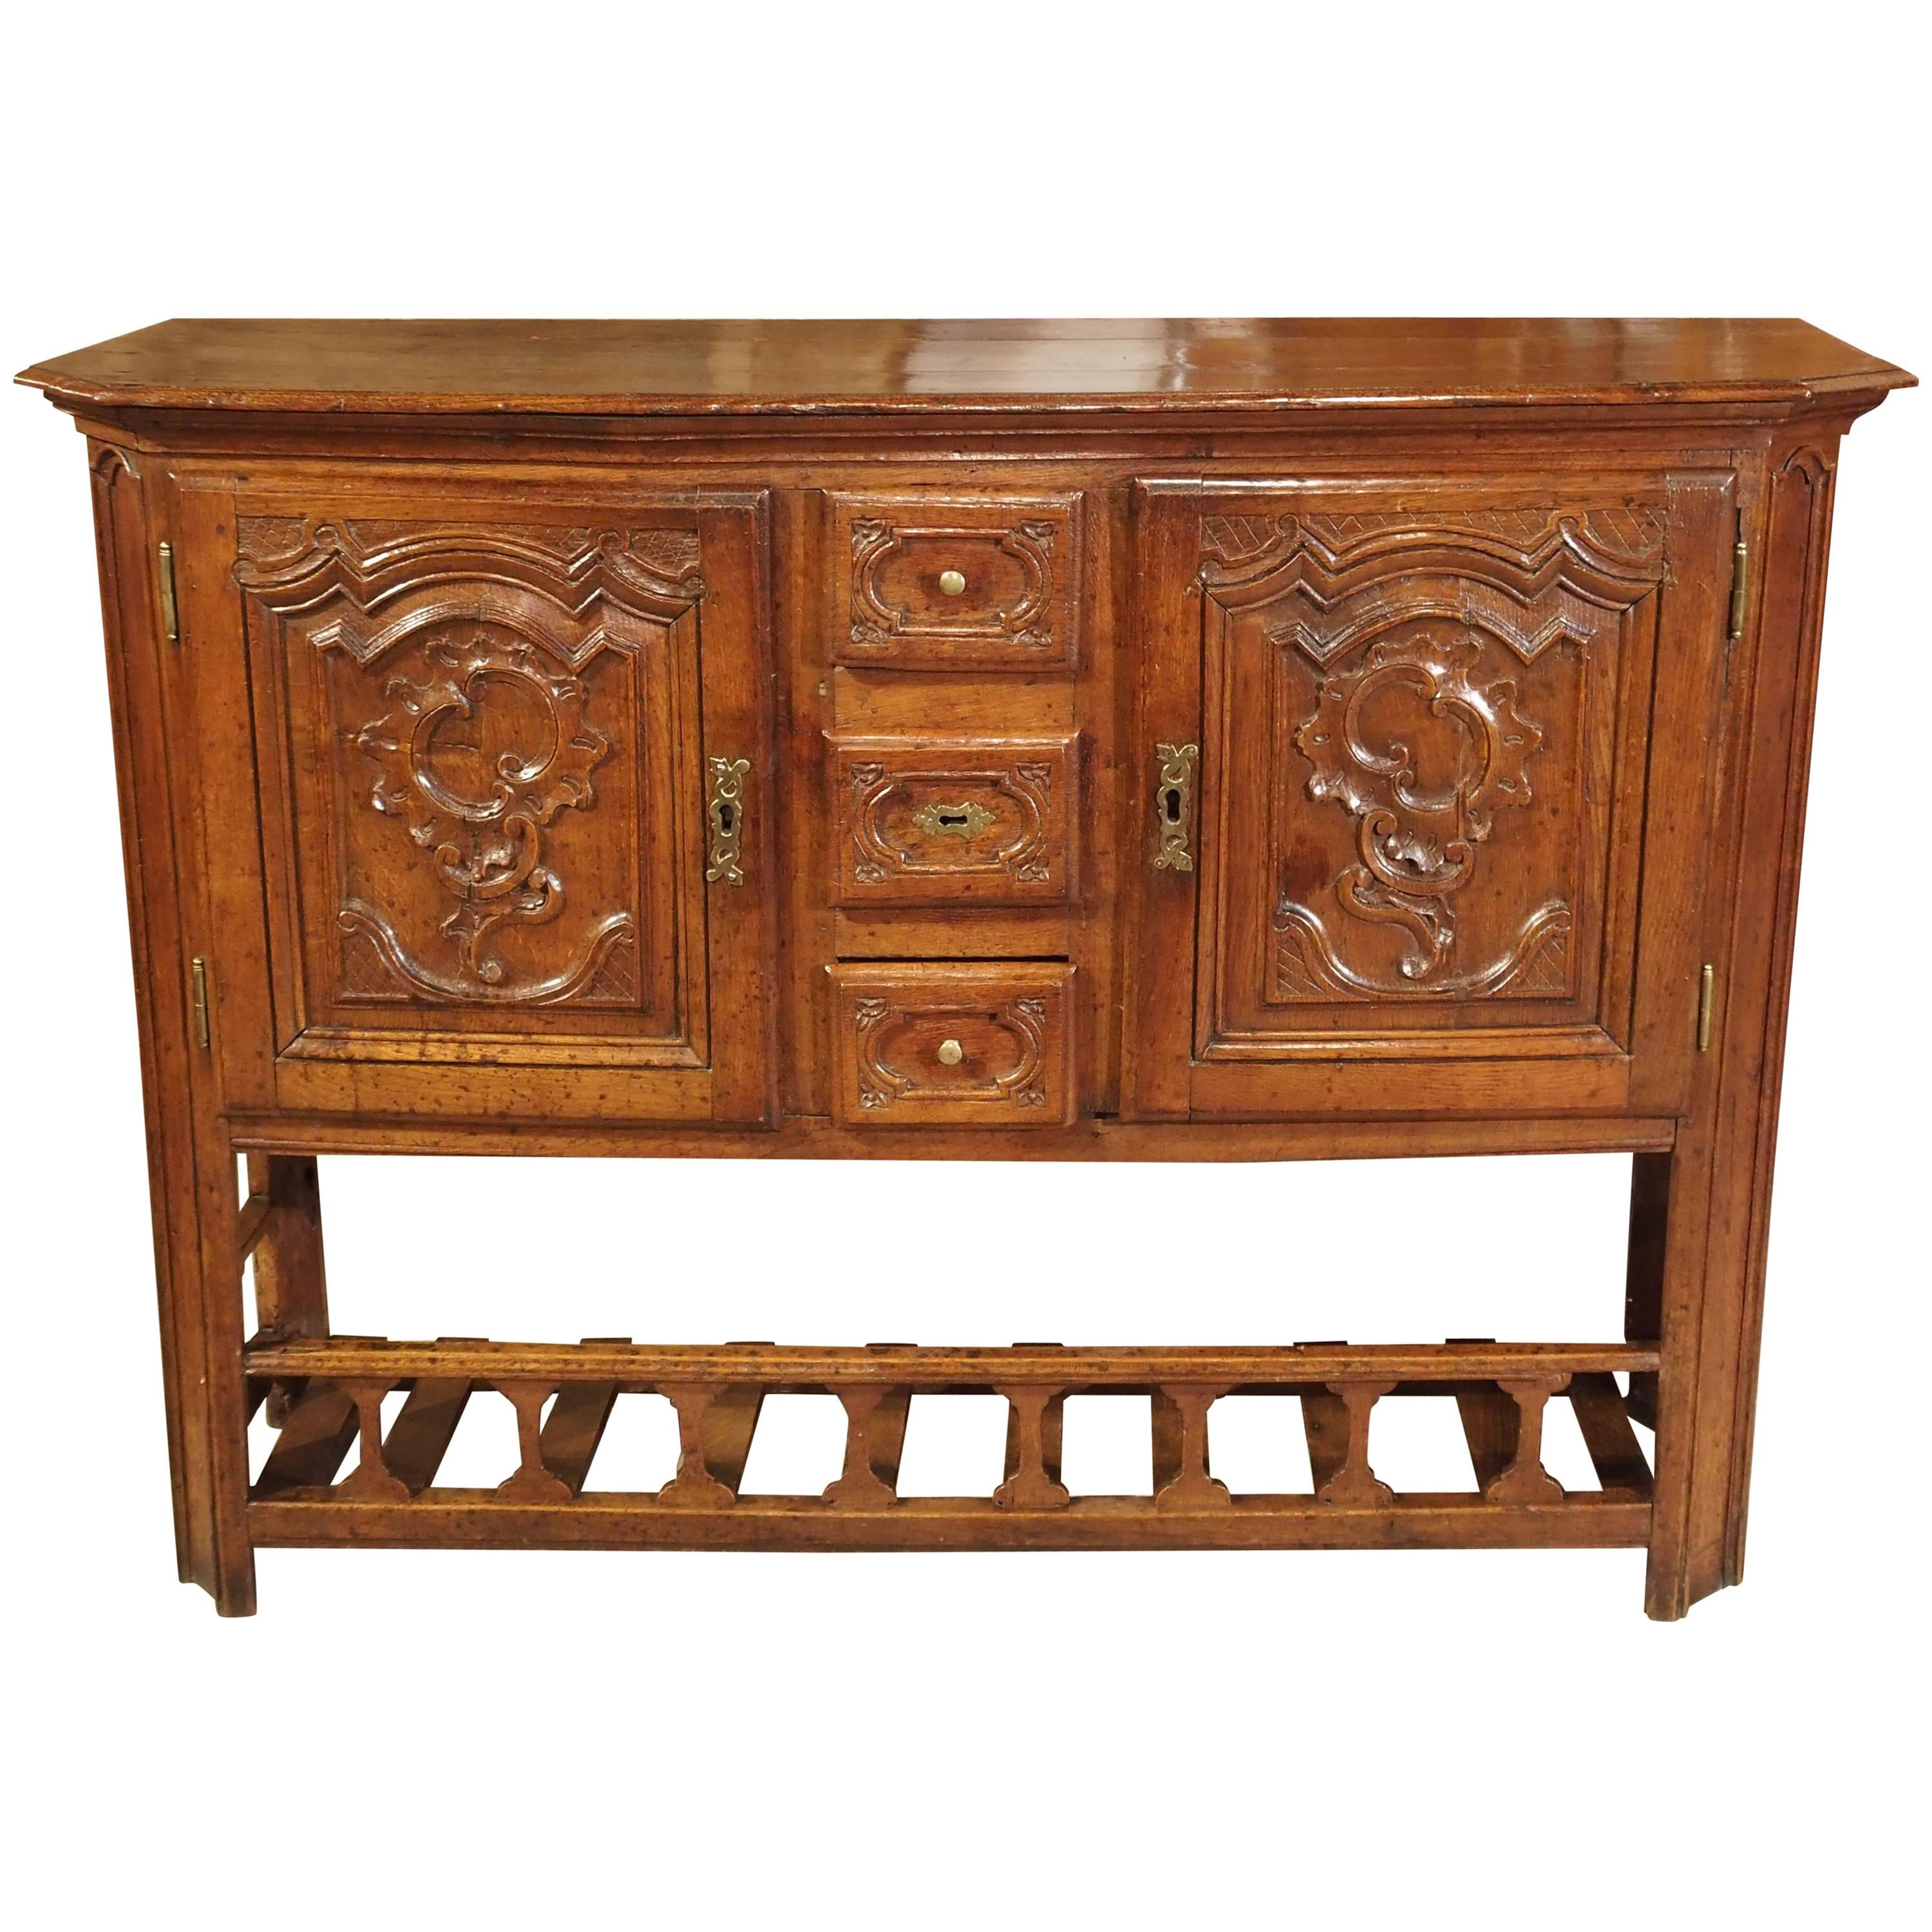 Antique Country French Kitchen Buffet from the Early 1800s